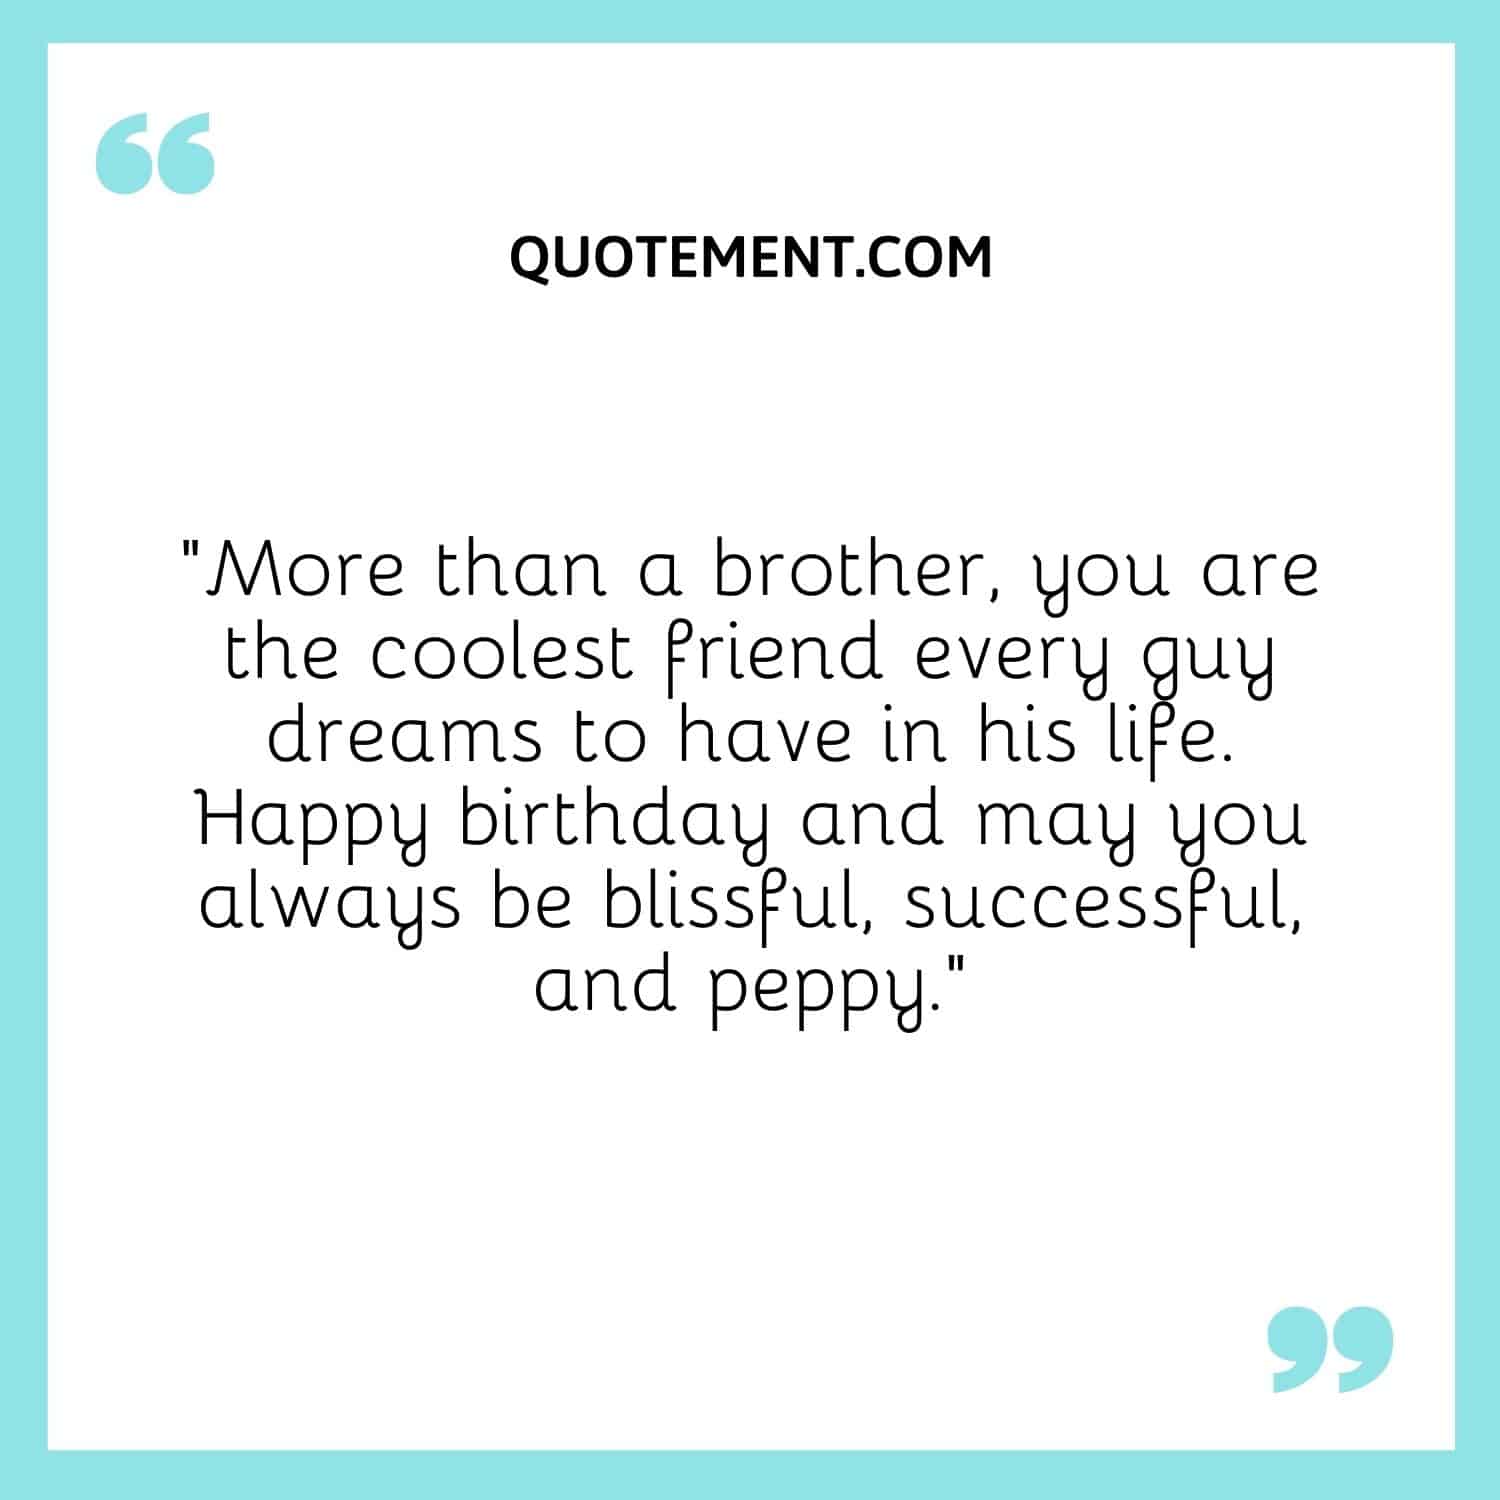 More than a brother, you are the coolest friend every guy dreams to have in his life.